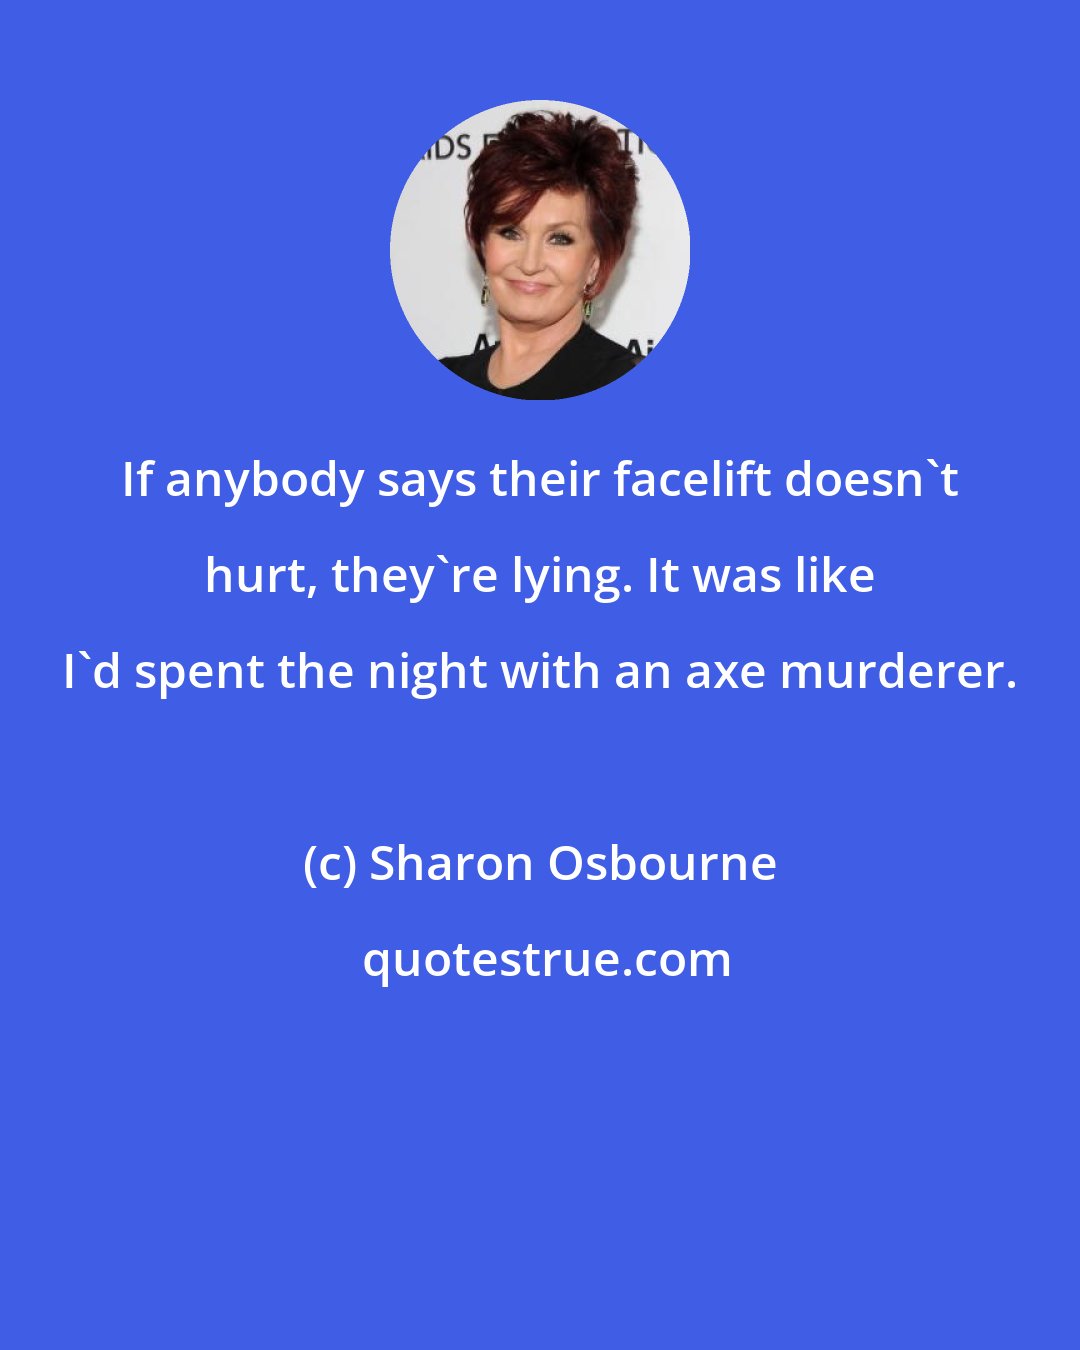 Sharon Osbourne: If anybody says their facelift doesn't hurt, they're lying. It was like I'd spent the night with an axe murderer.